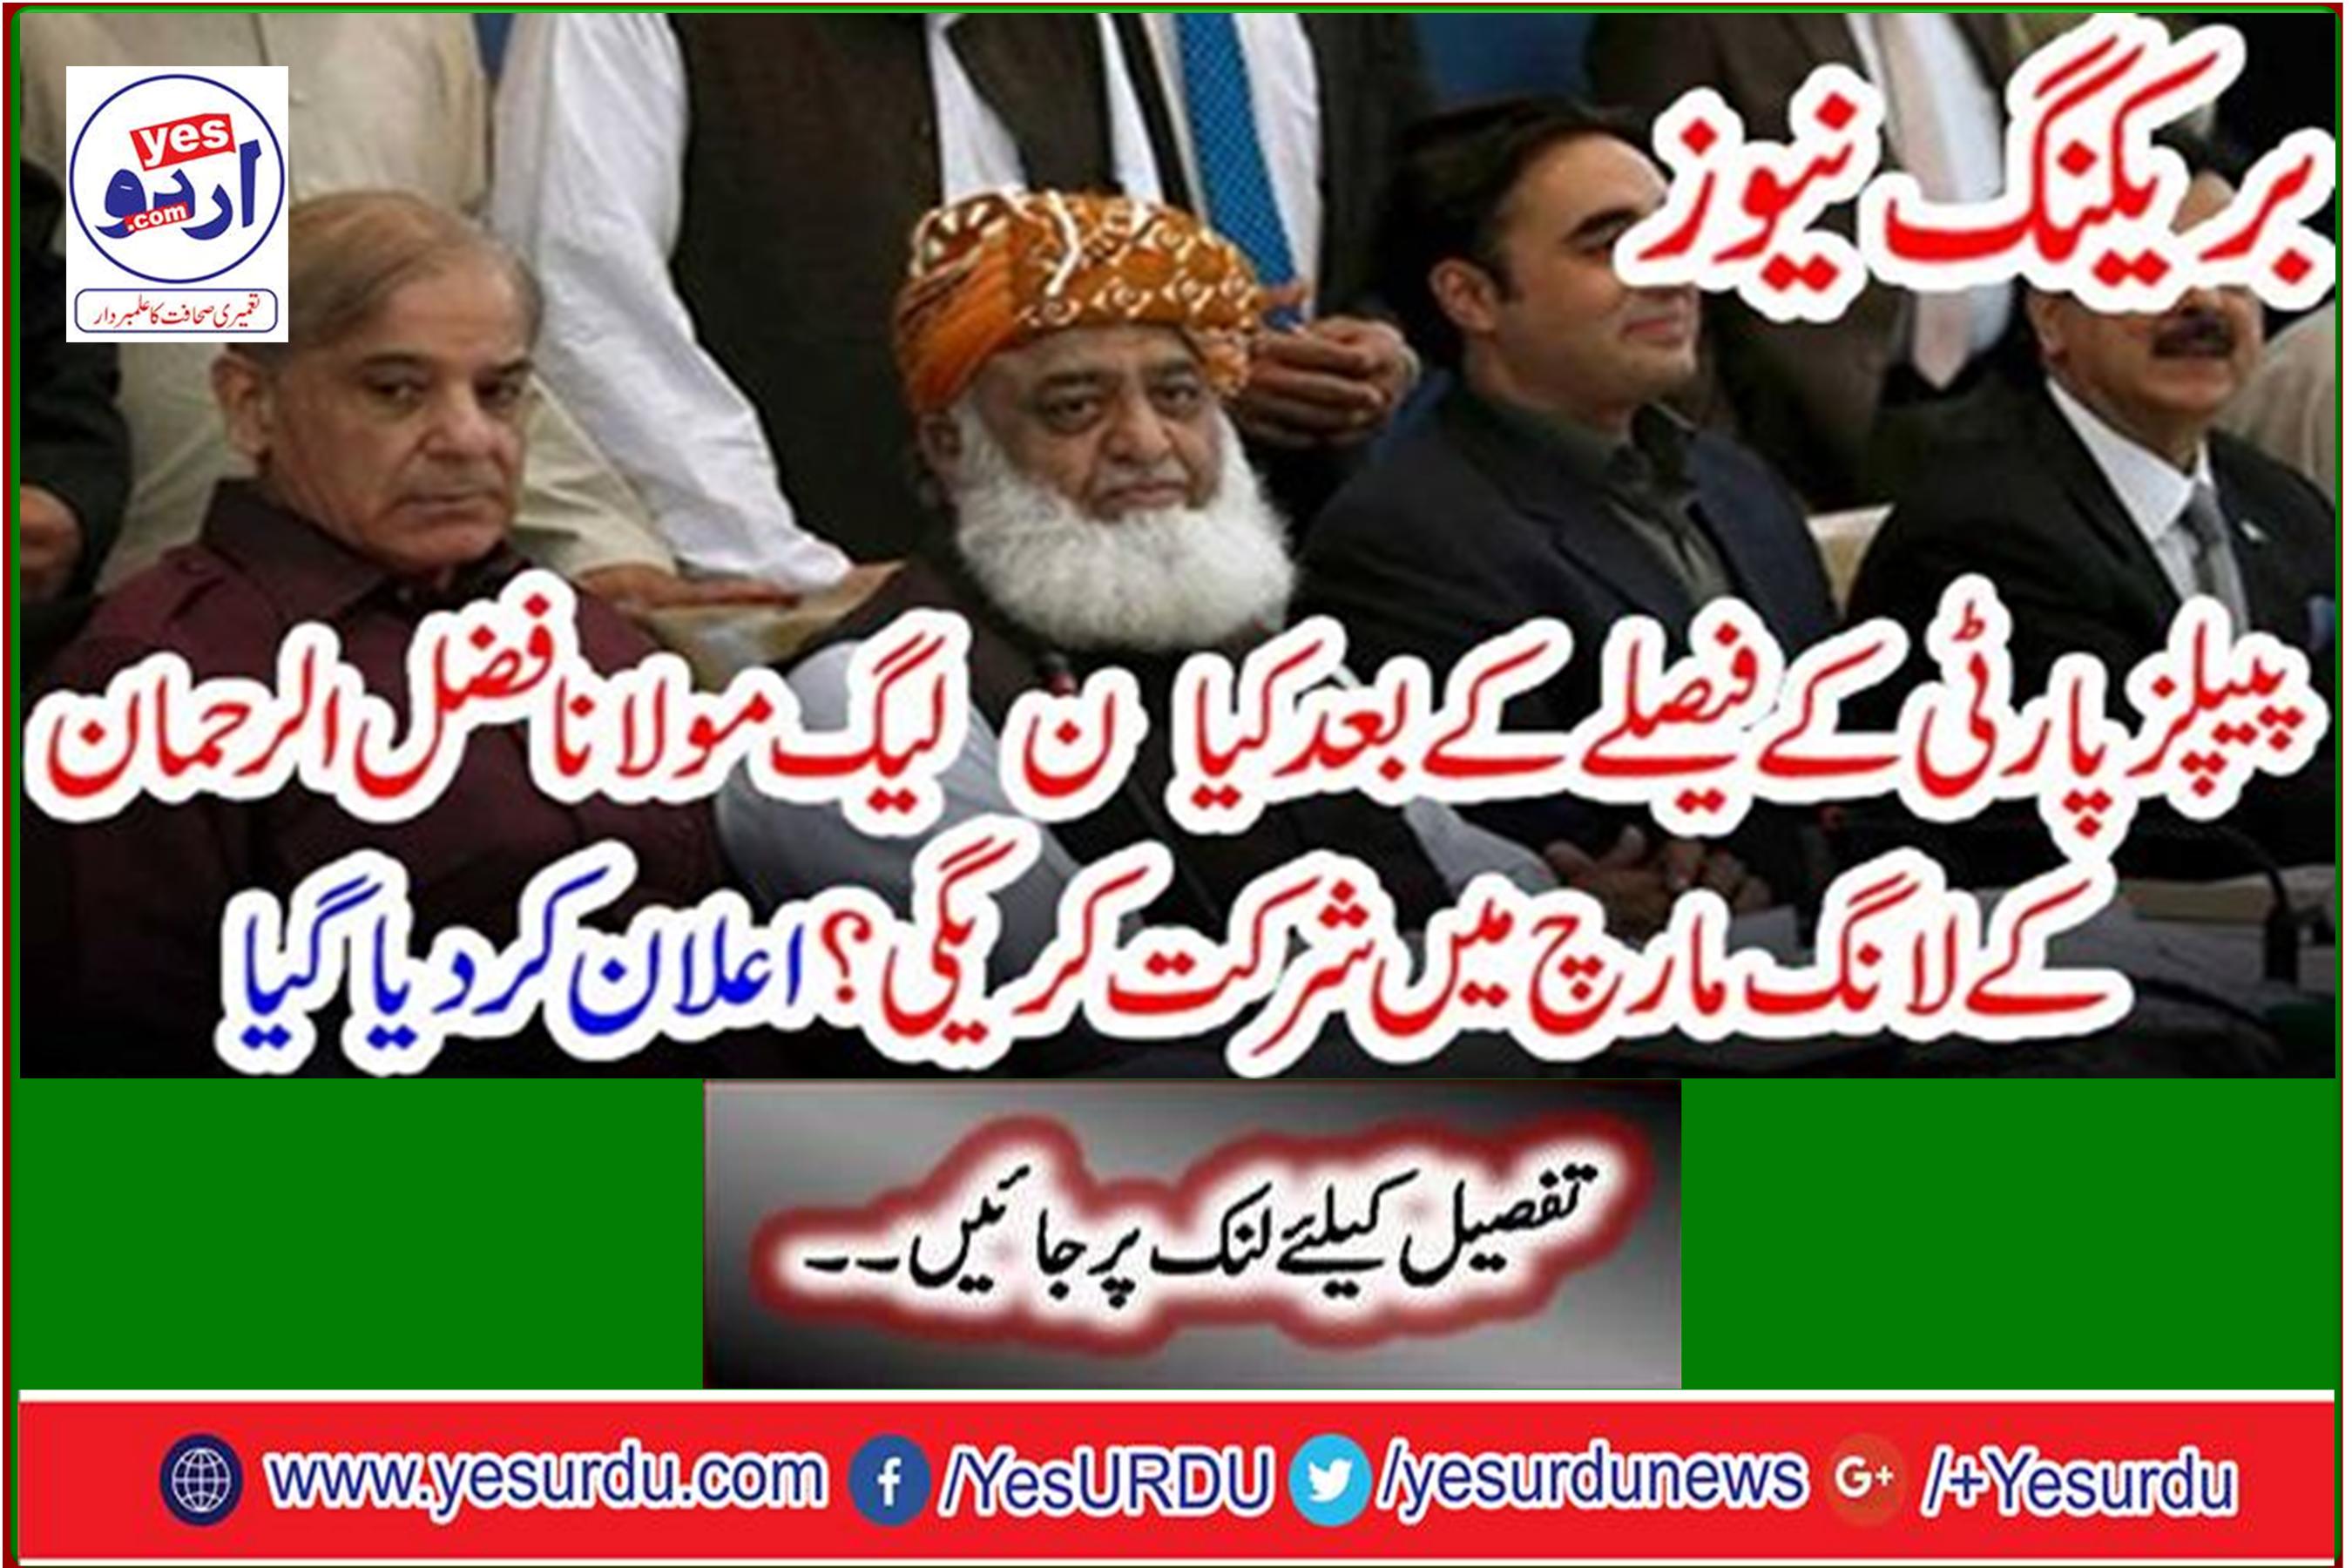 Breaking News: Will PML-N join Maulana Fazl-ur-Rehman's Long March after decision of PPP?